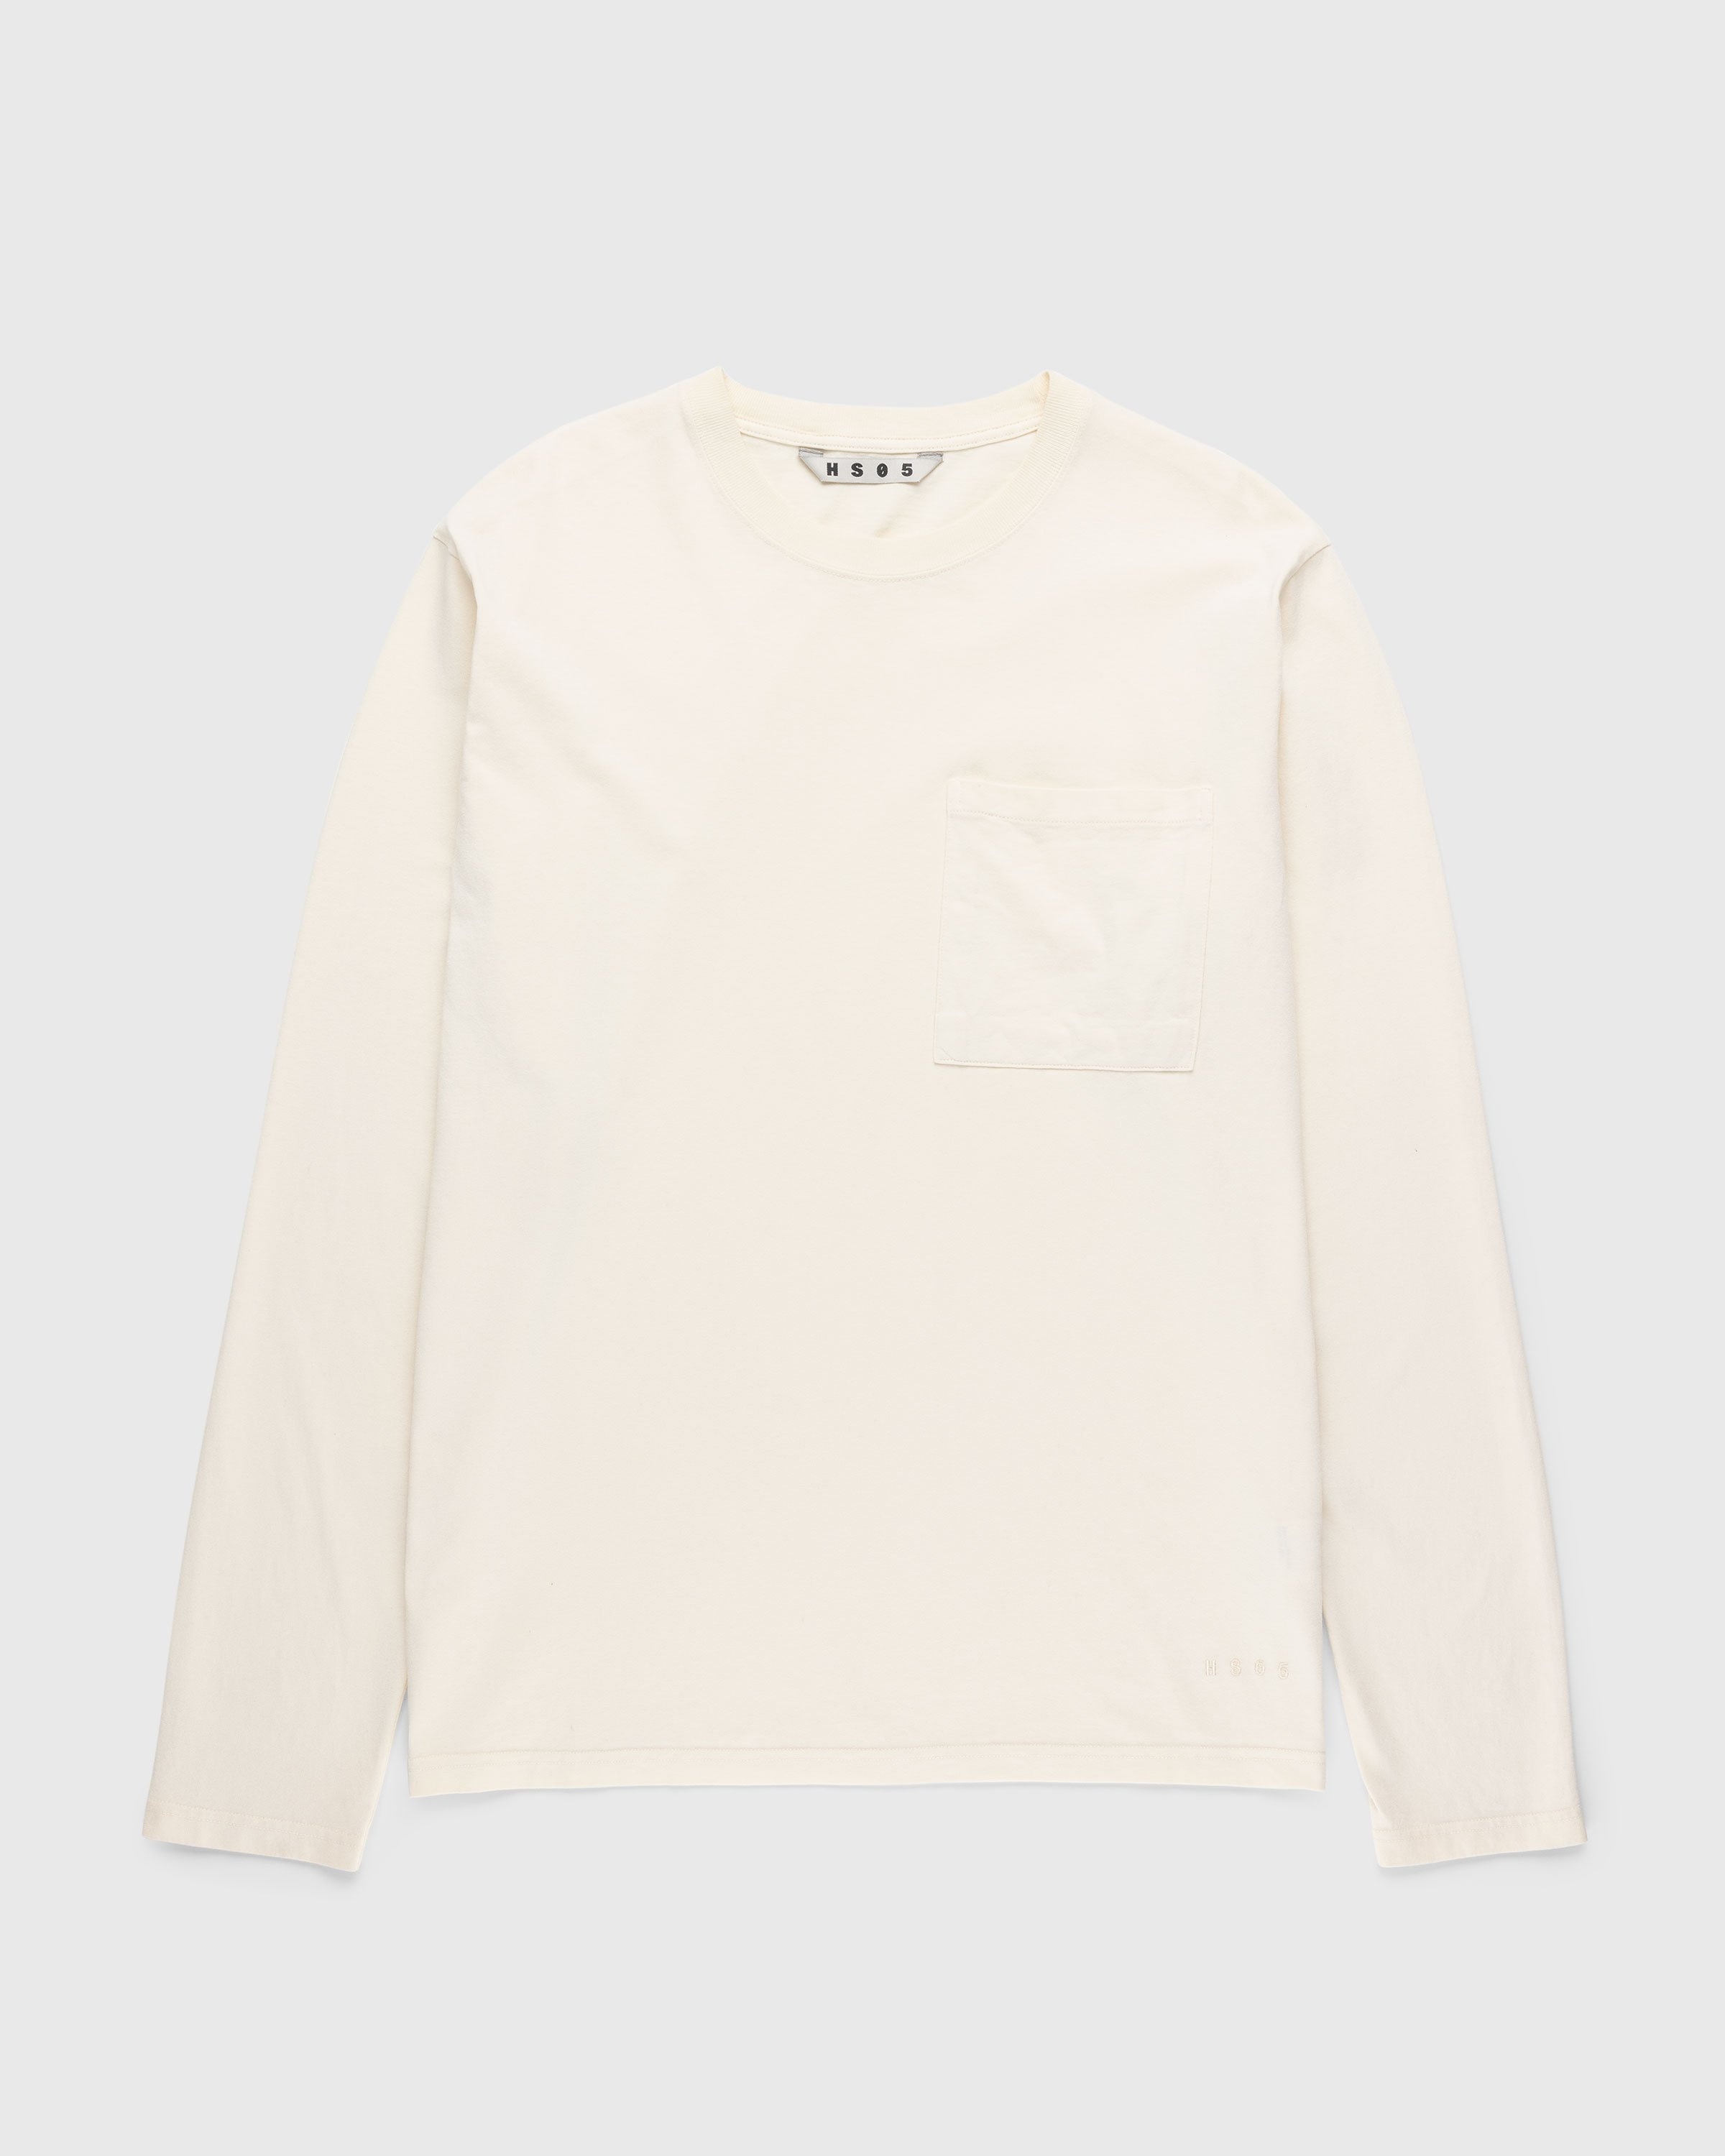 Highsnobiety HS05 – Pigment Dyed Boxy Long Sleeves Jersey Natural - Longsleeves - Beige - Image 1